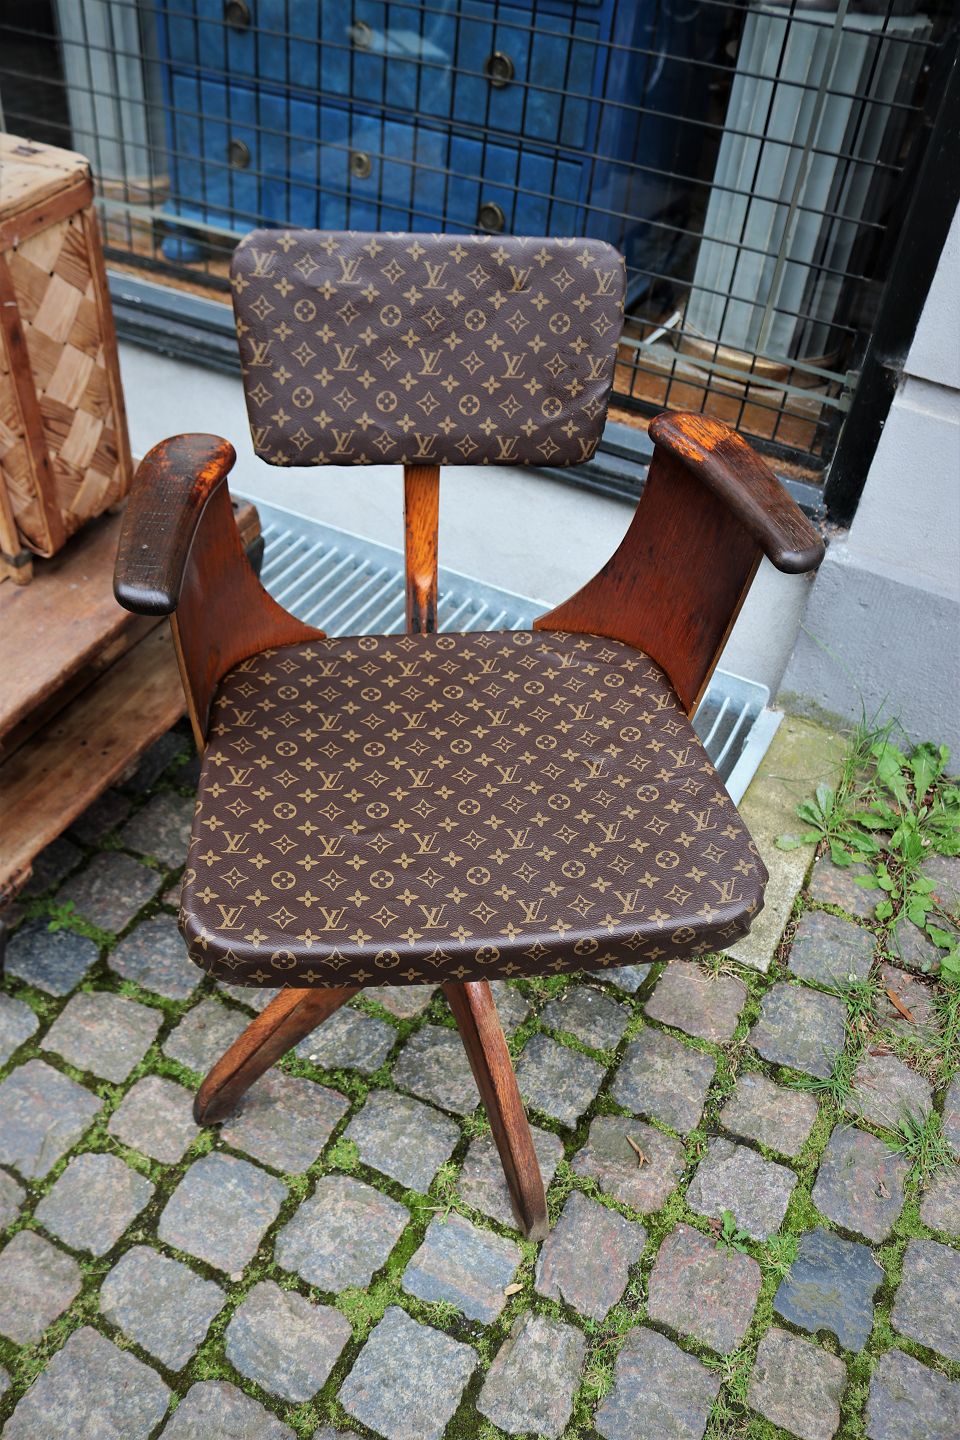 K&Co - Old office chair upholstered with Louis Vuitton monogram